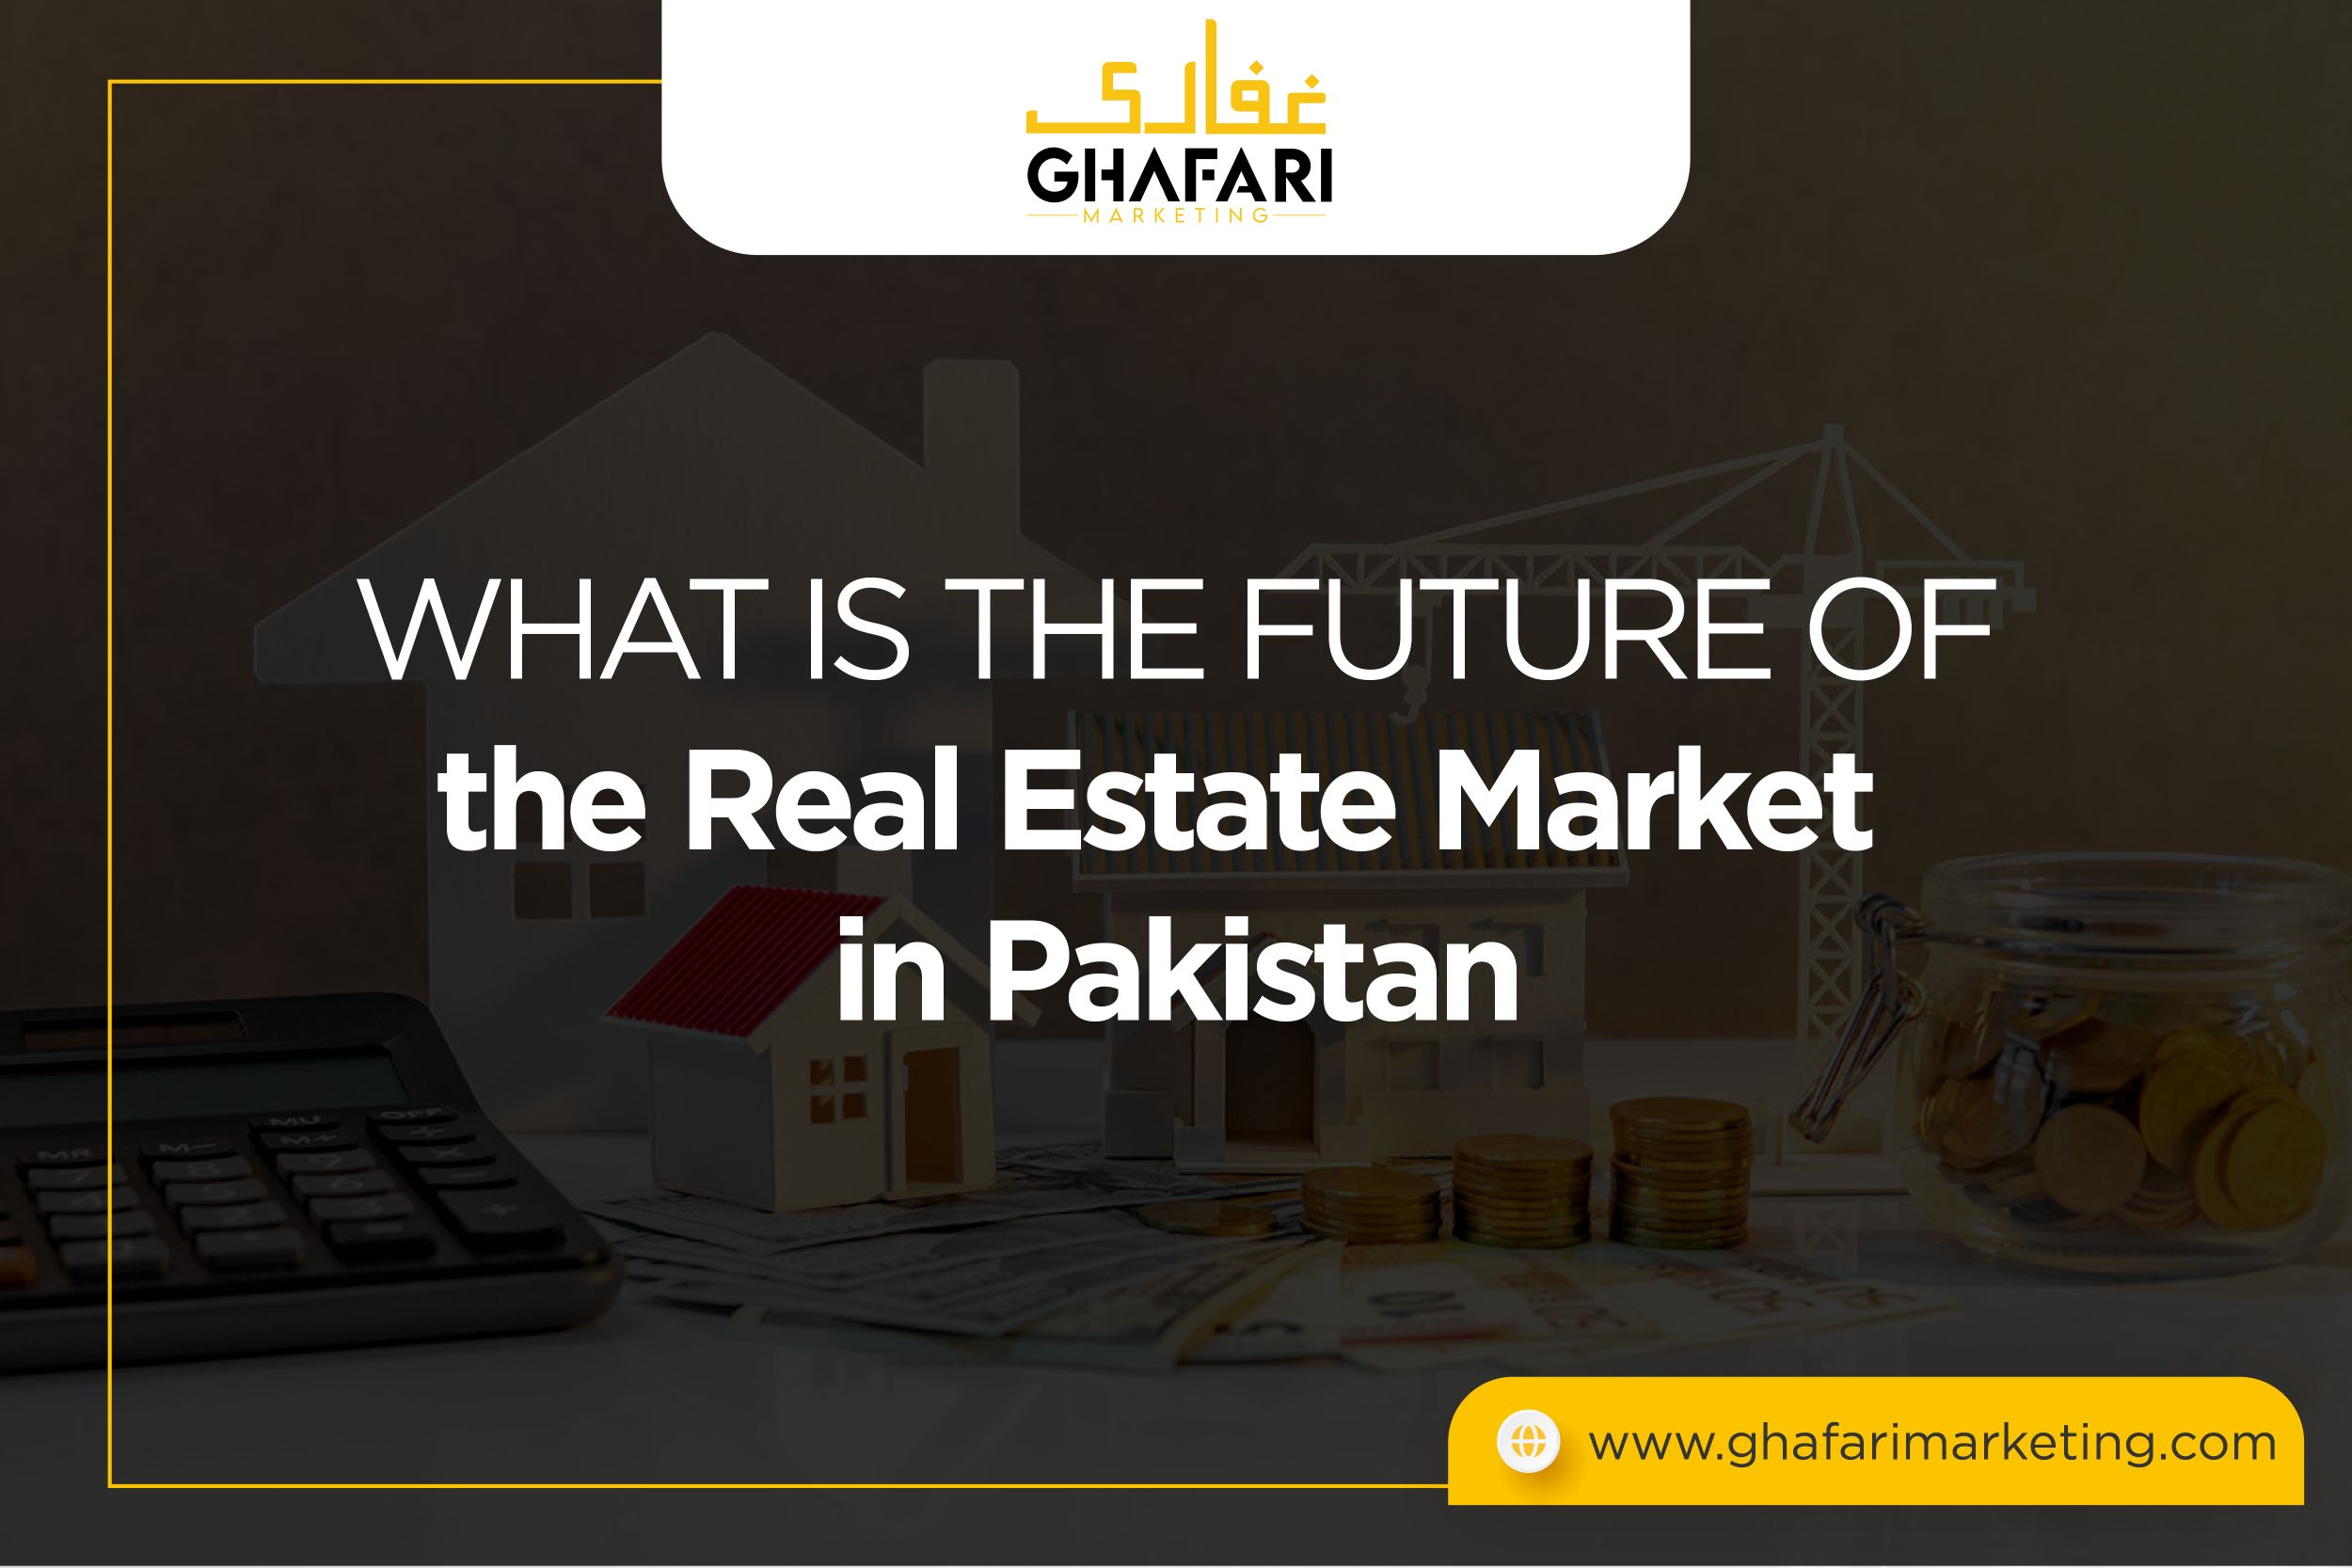 What is the future of the Real Estate Market in Pakistan